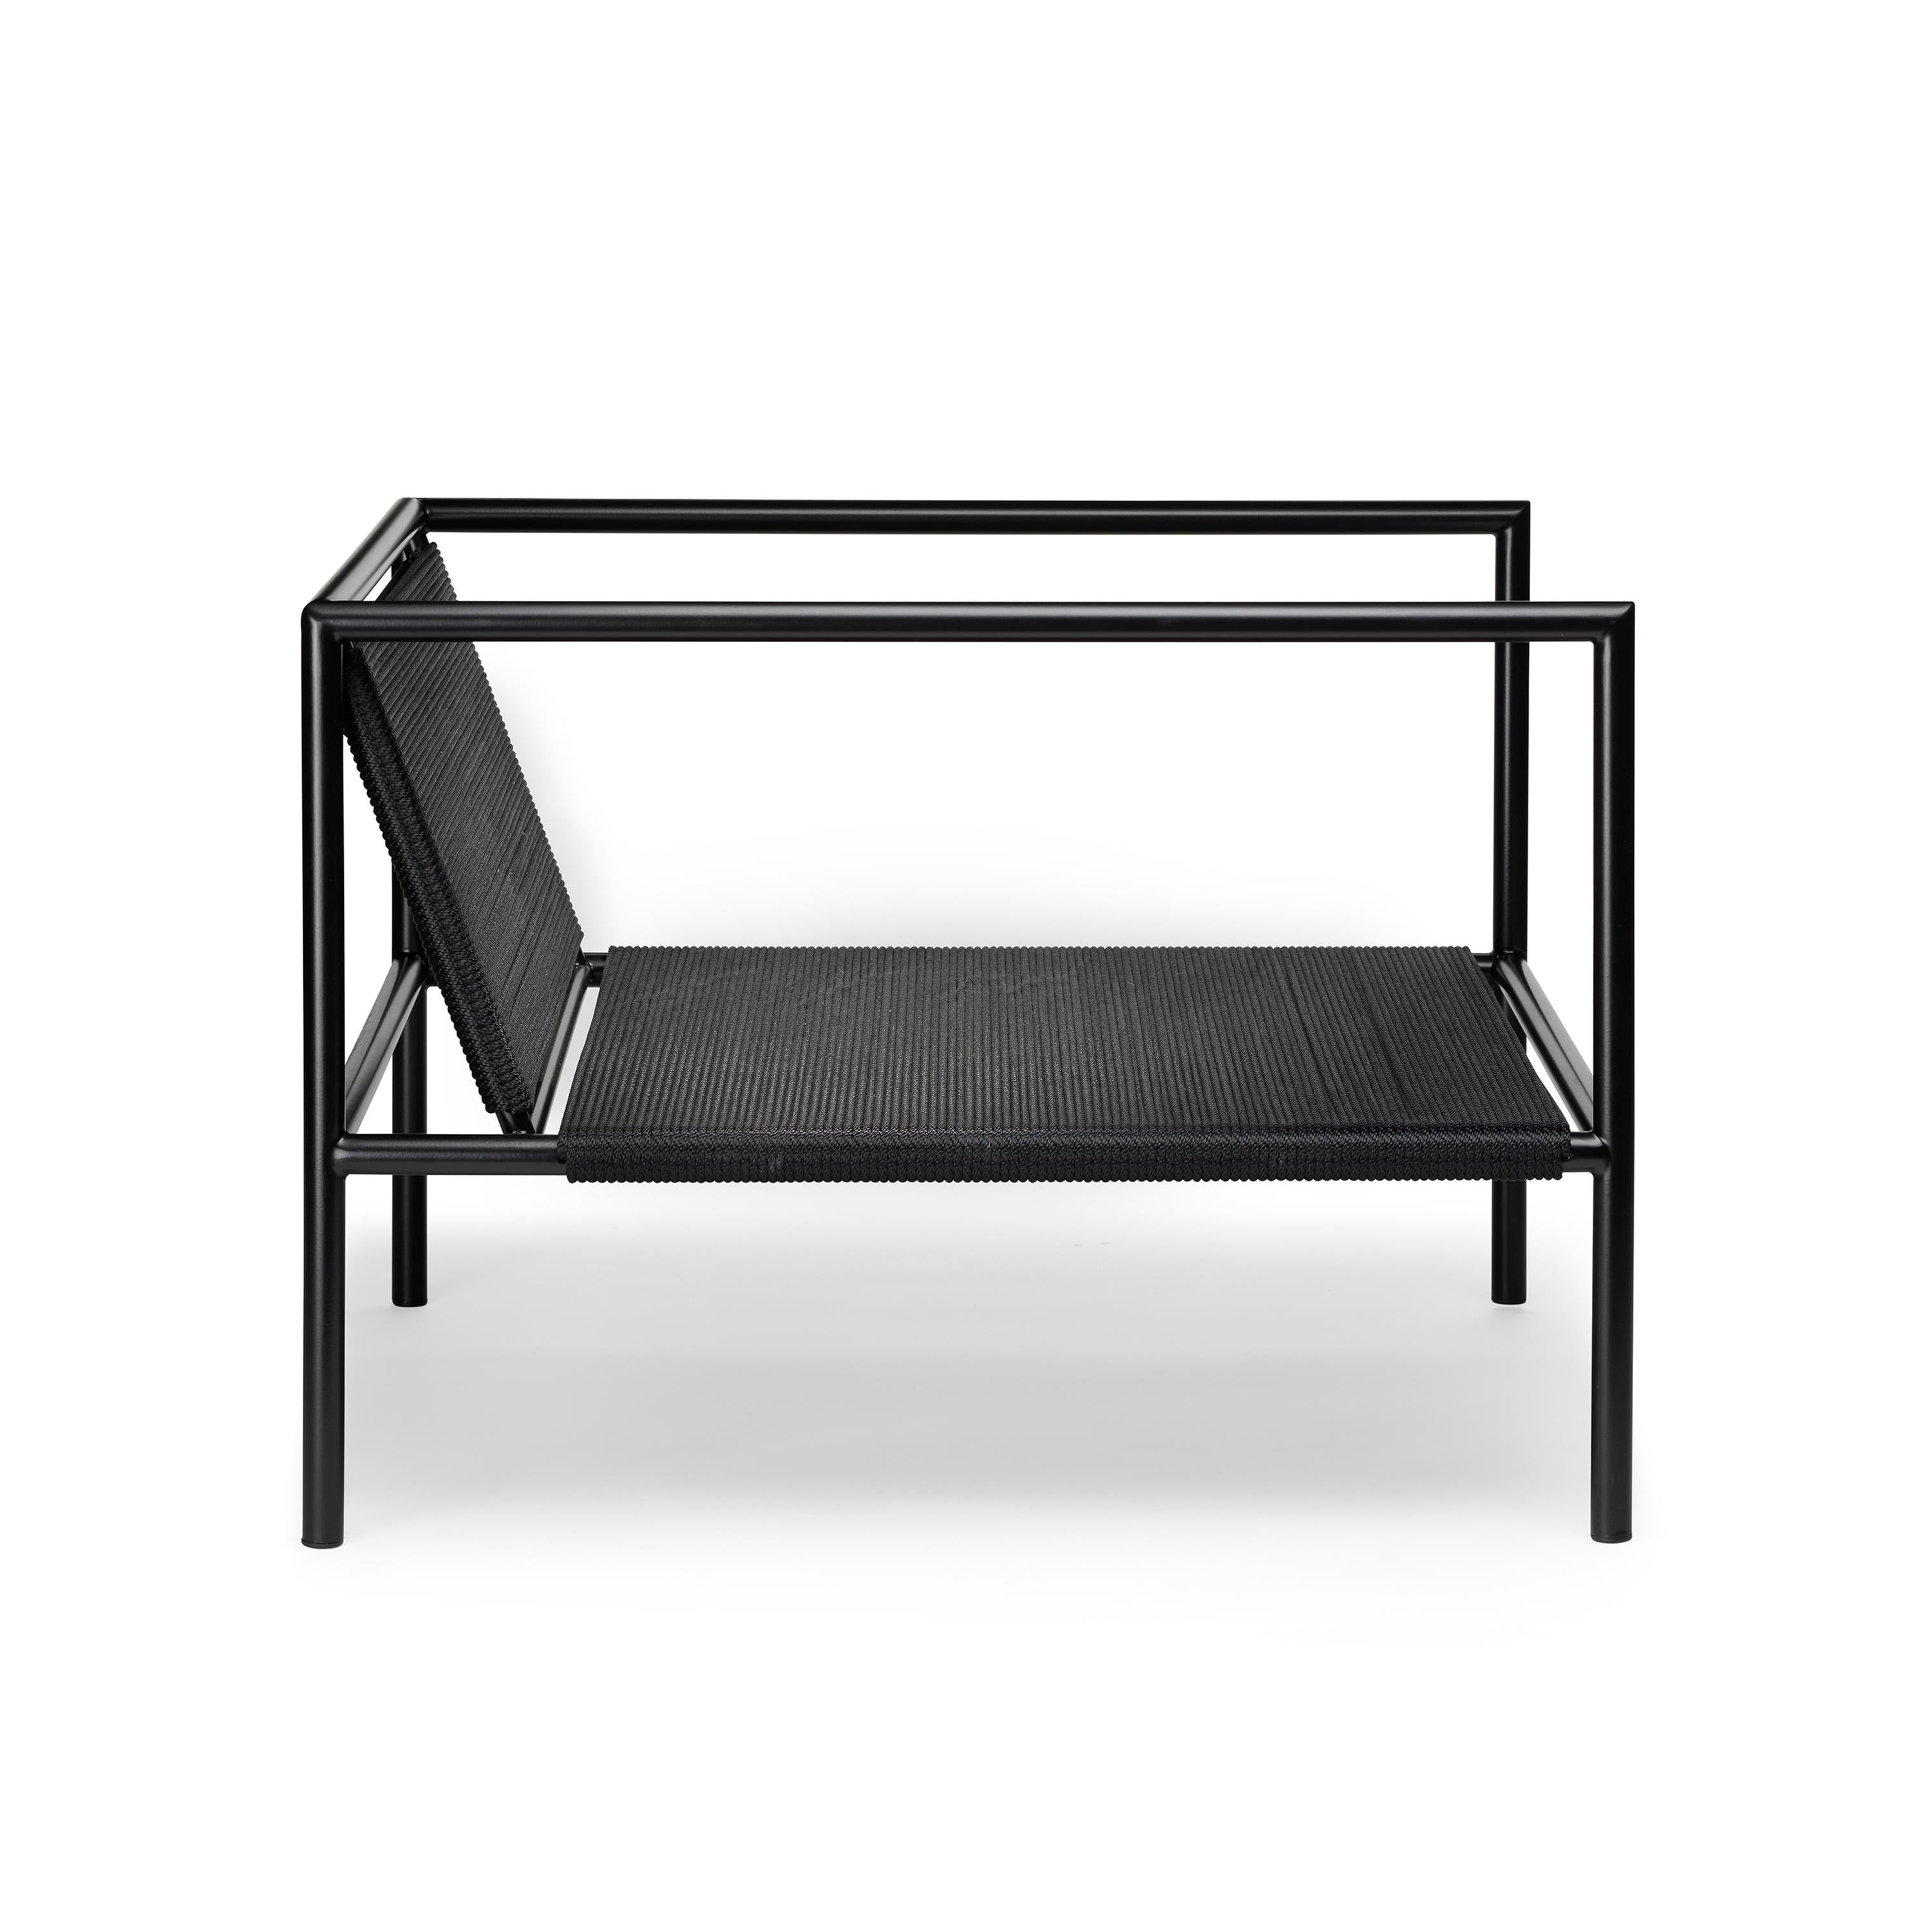 Ten10 1.2.3 Series outdoor armchair in semi gloss black powder coated stainless steel, nylon cord in black or white, and 4